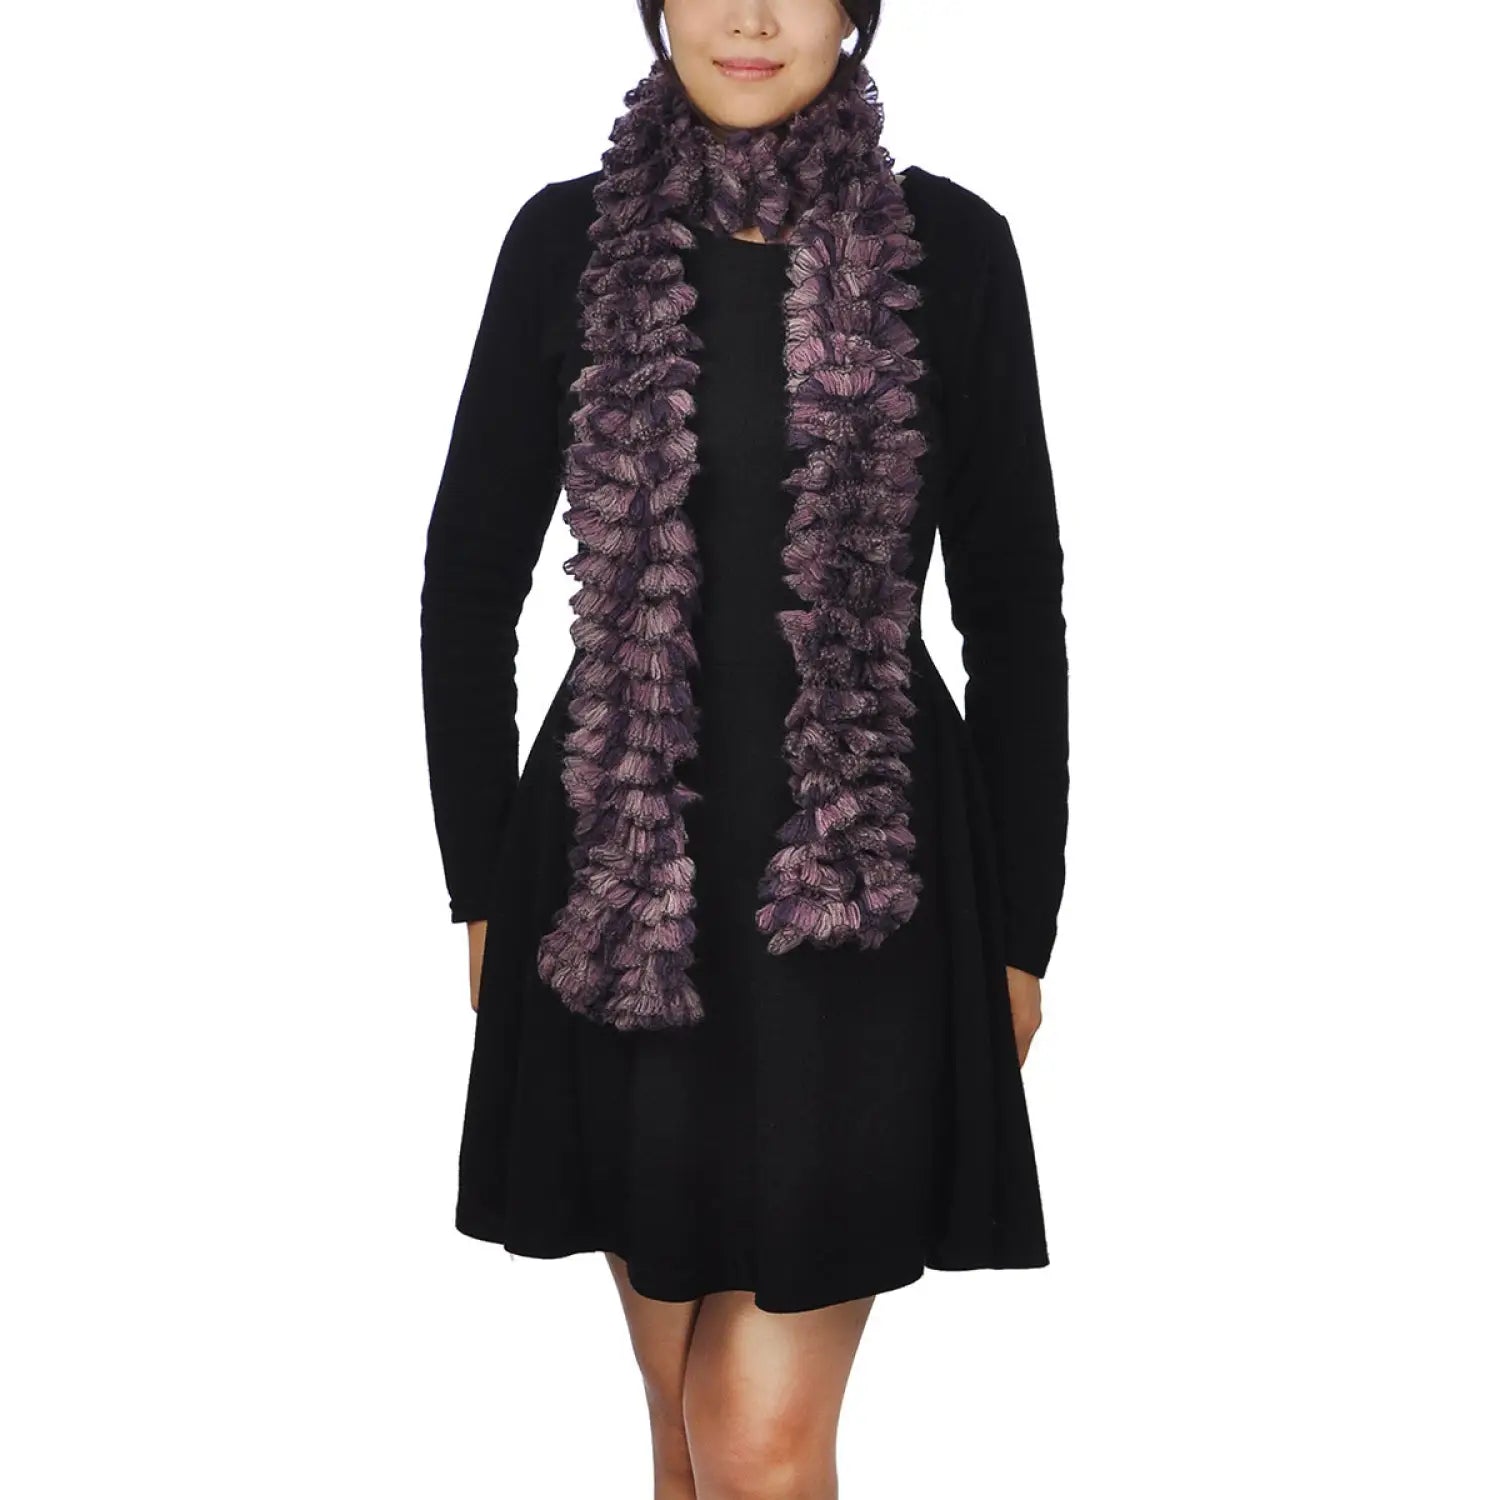 Multicoloured textured boa print scarf featuring woman in black dress and purple scarf